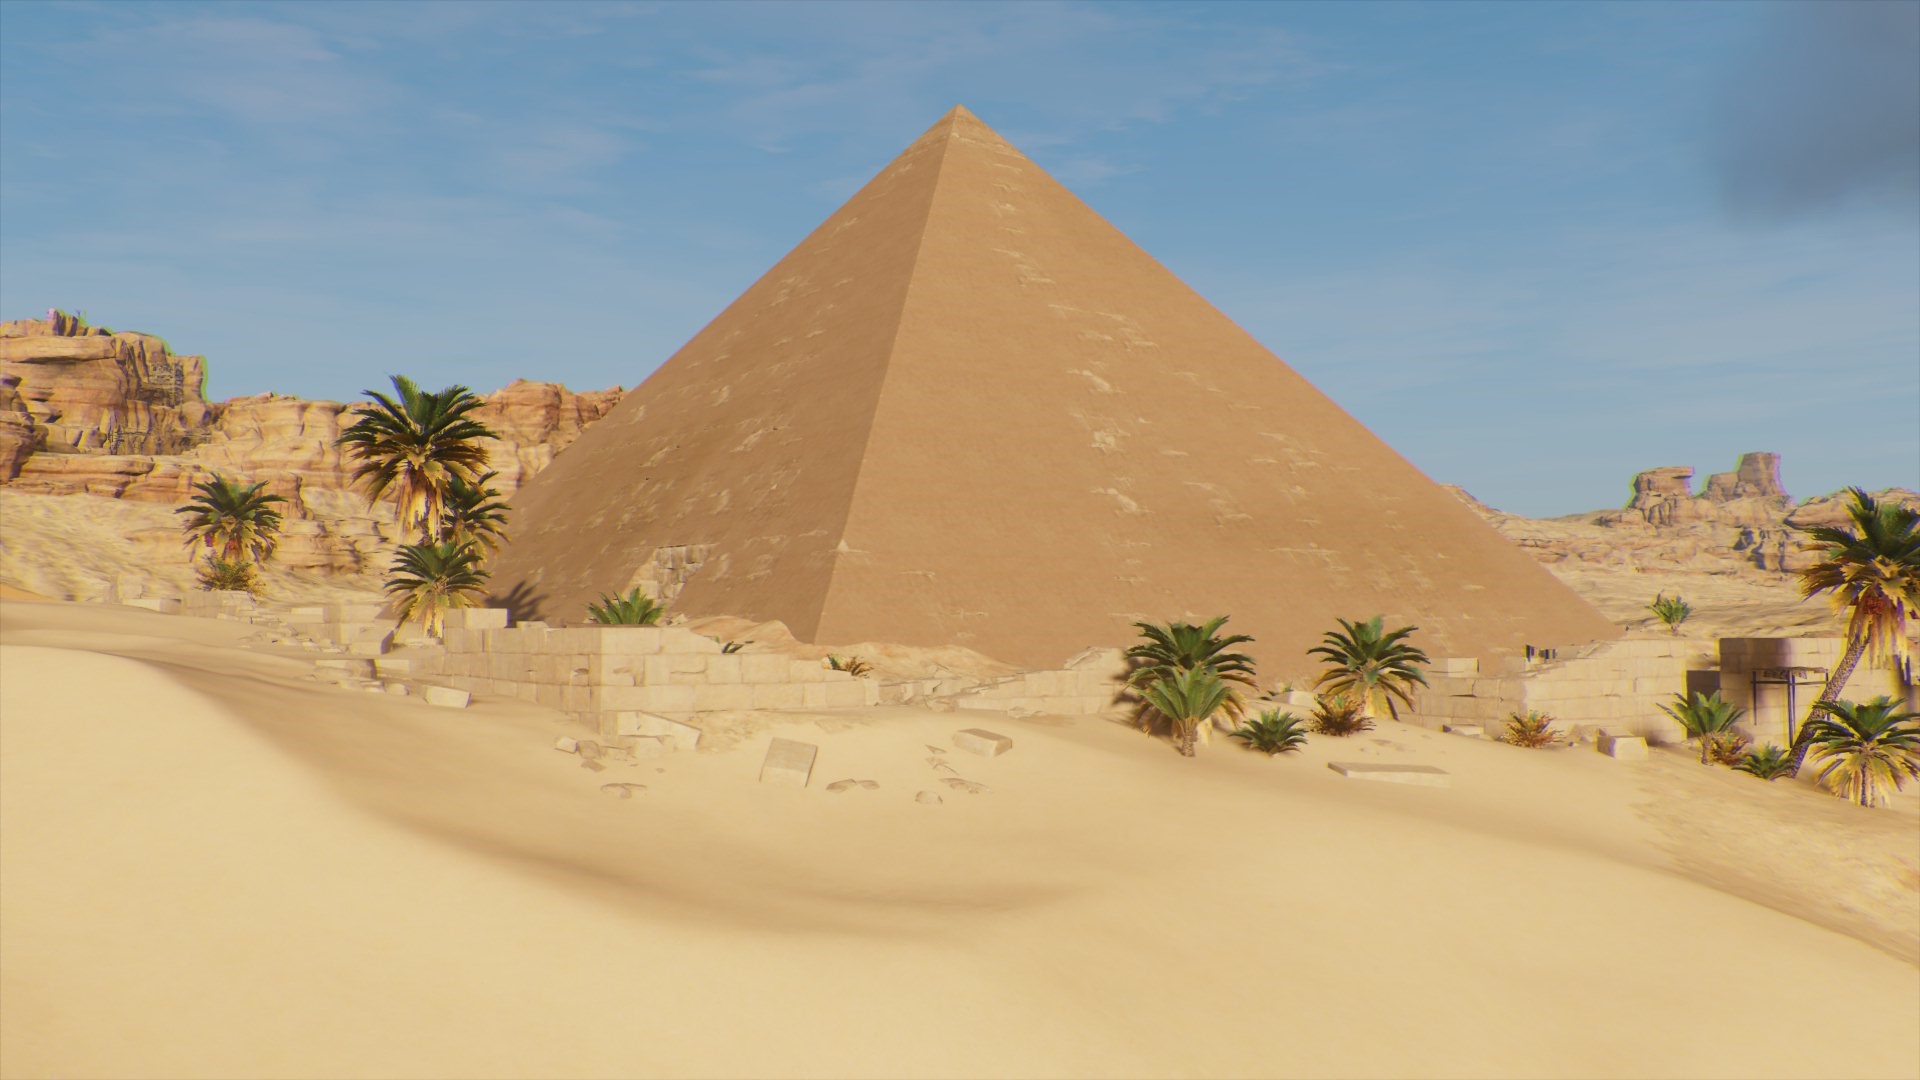 the red pyramid